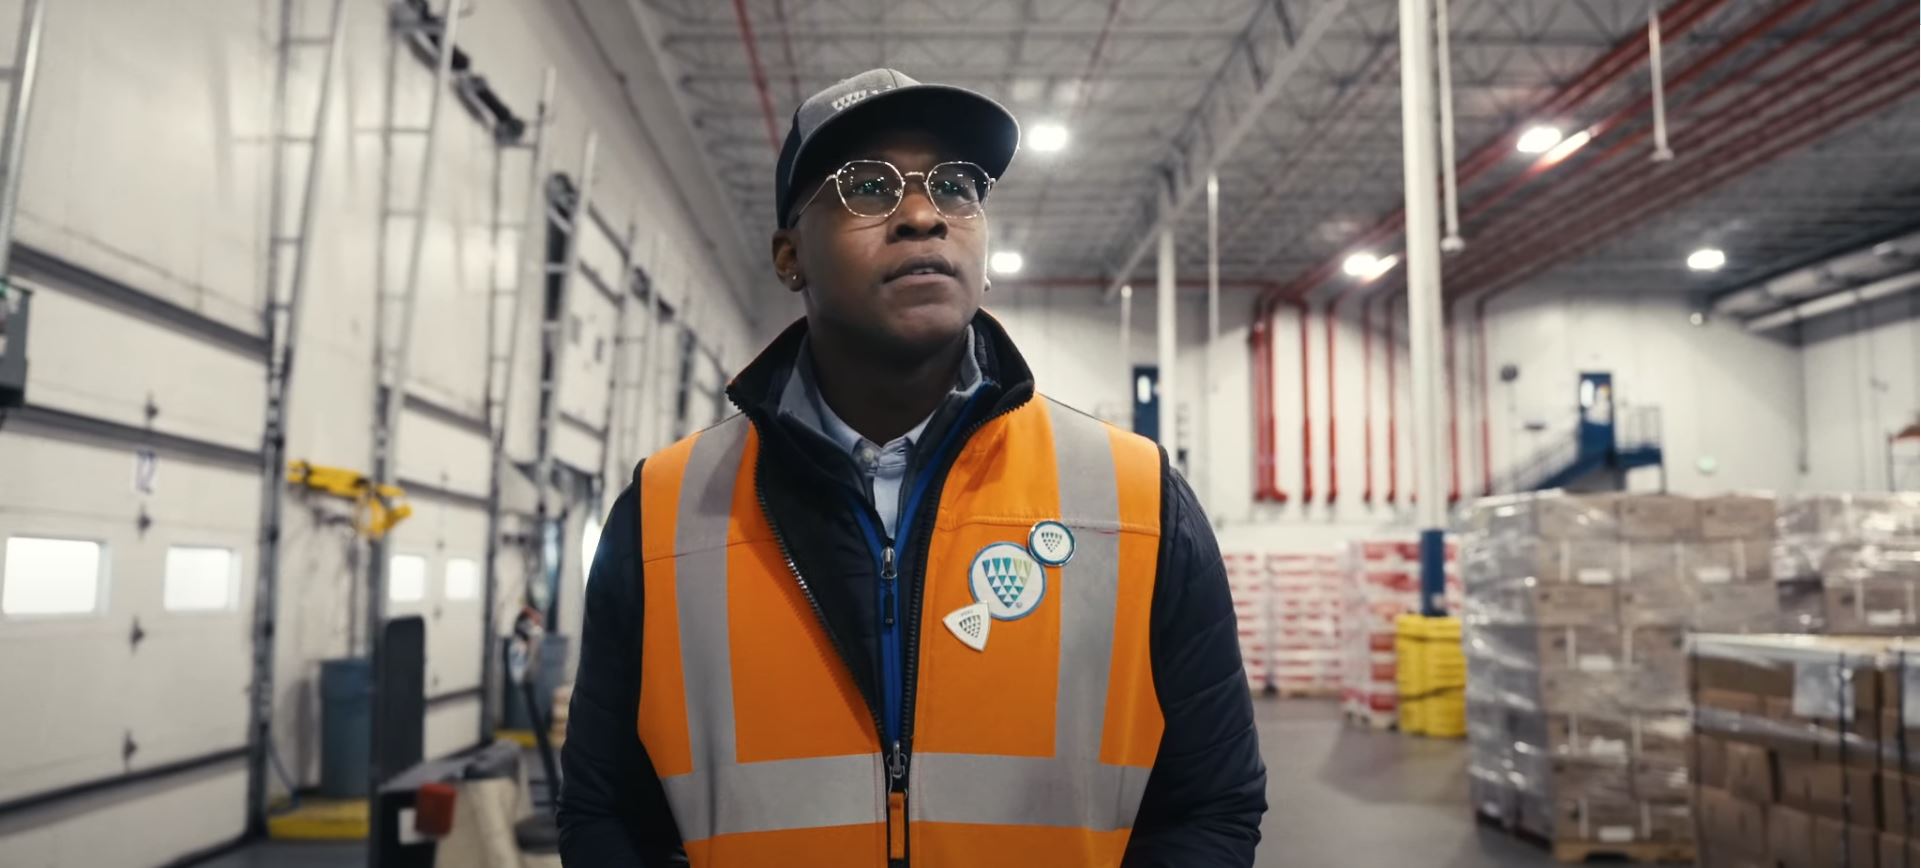 An attentive warehouse team member wearing a reflective orange vest and glasses walks through a spacious warehouse.